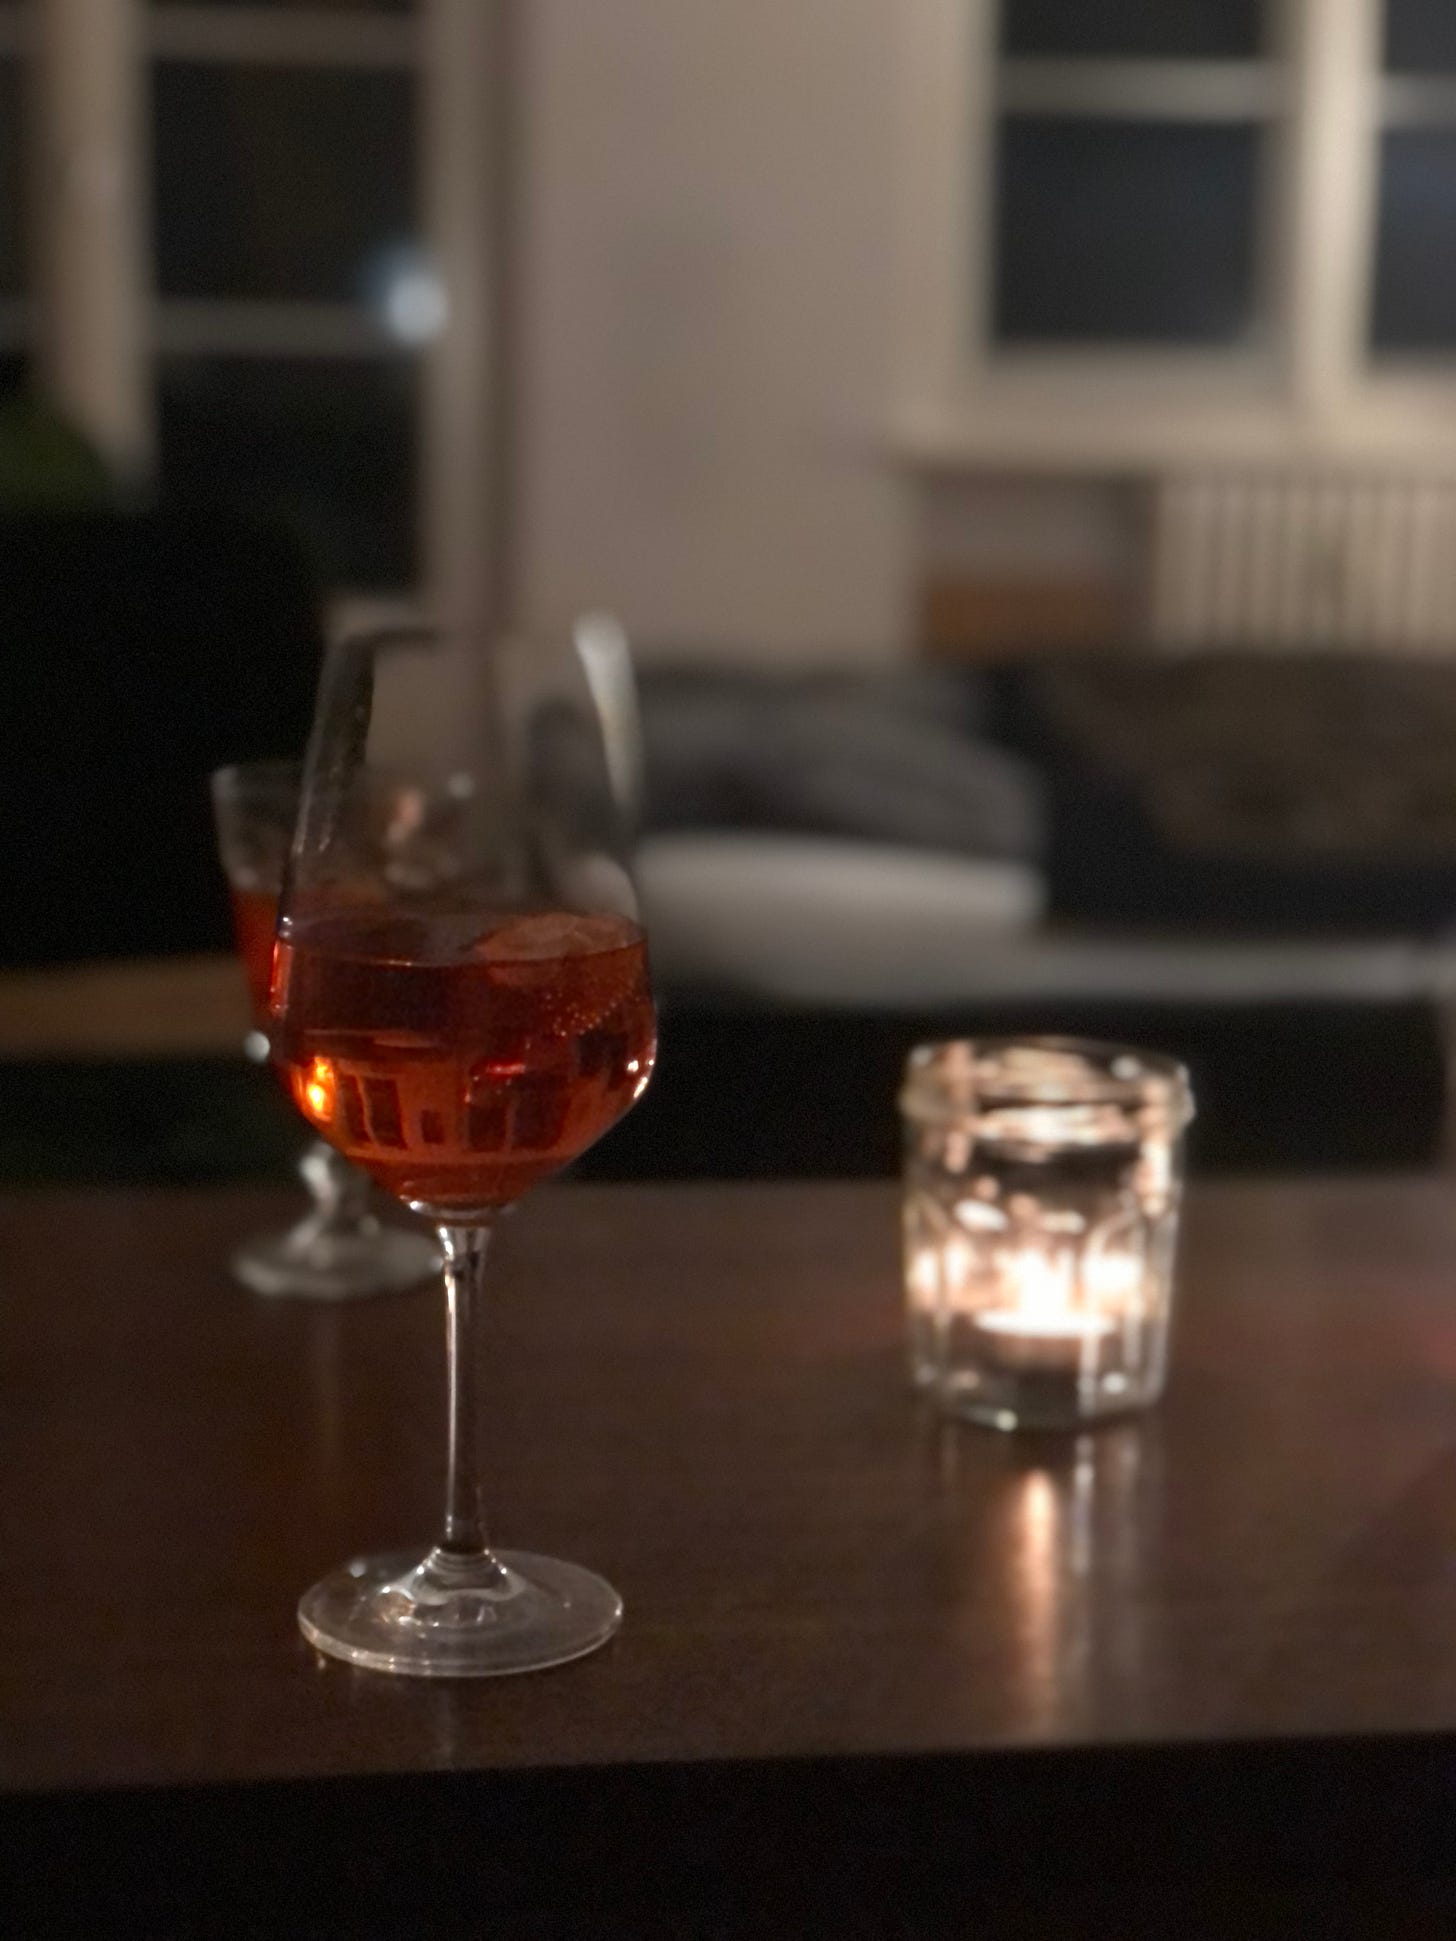 An evening scene. A glass of pinkish liquid set on a low table. Just behind it, another differently shaped glass containing the same pink liquid. Beside this, a jar with a candle lit inside it. 